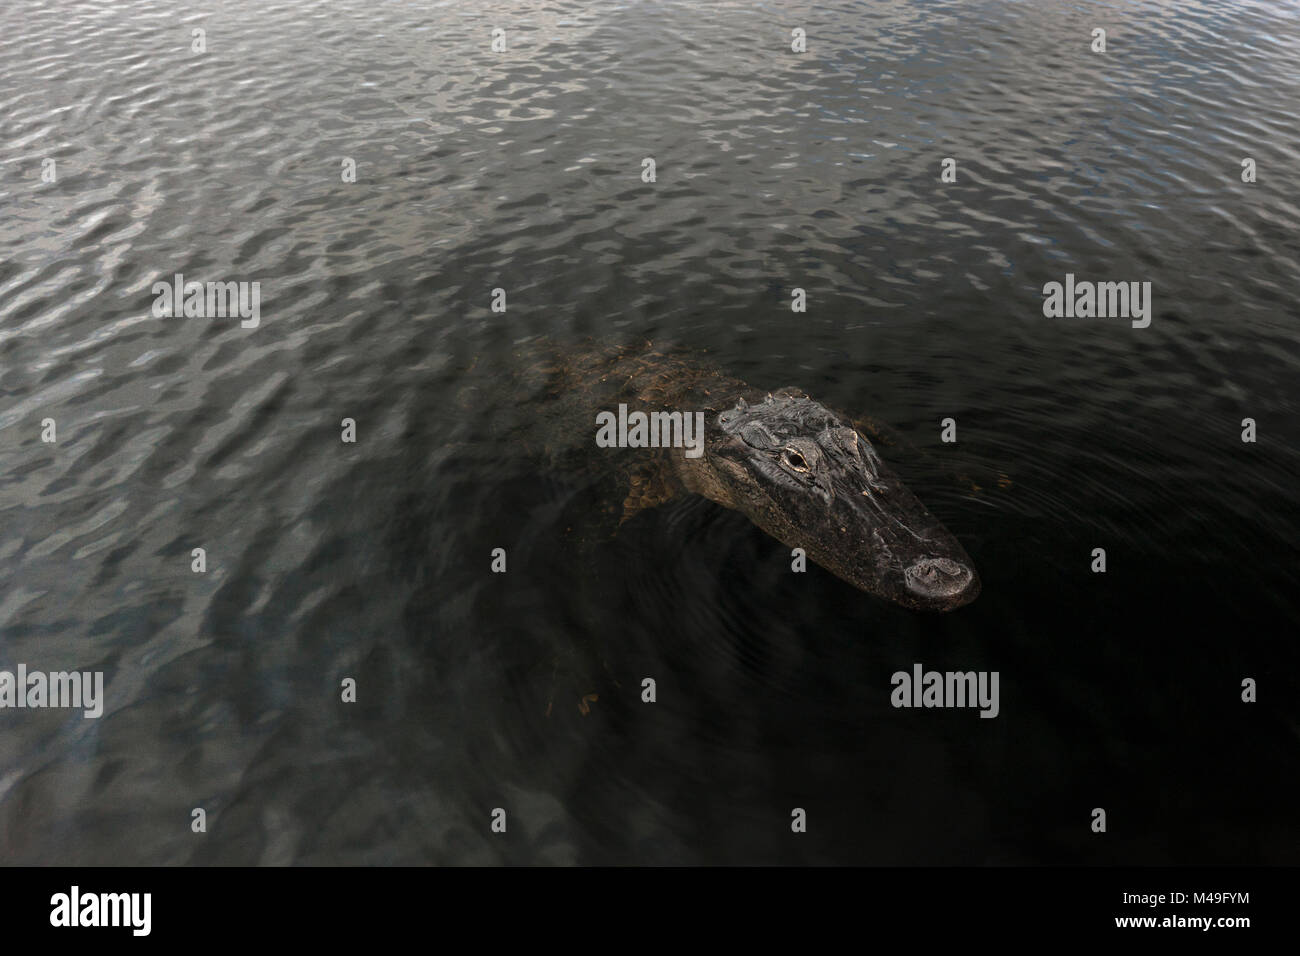 American alligator (Alligator mississippiensis), seen from above, Everglades, USA, January. Stock Photo